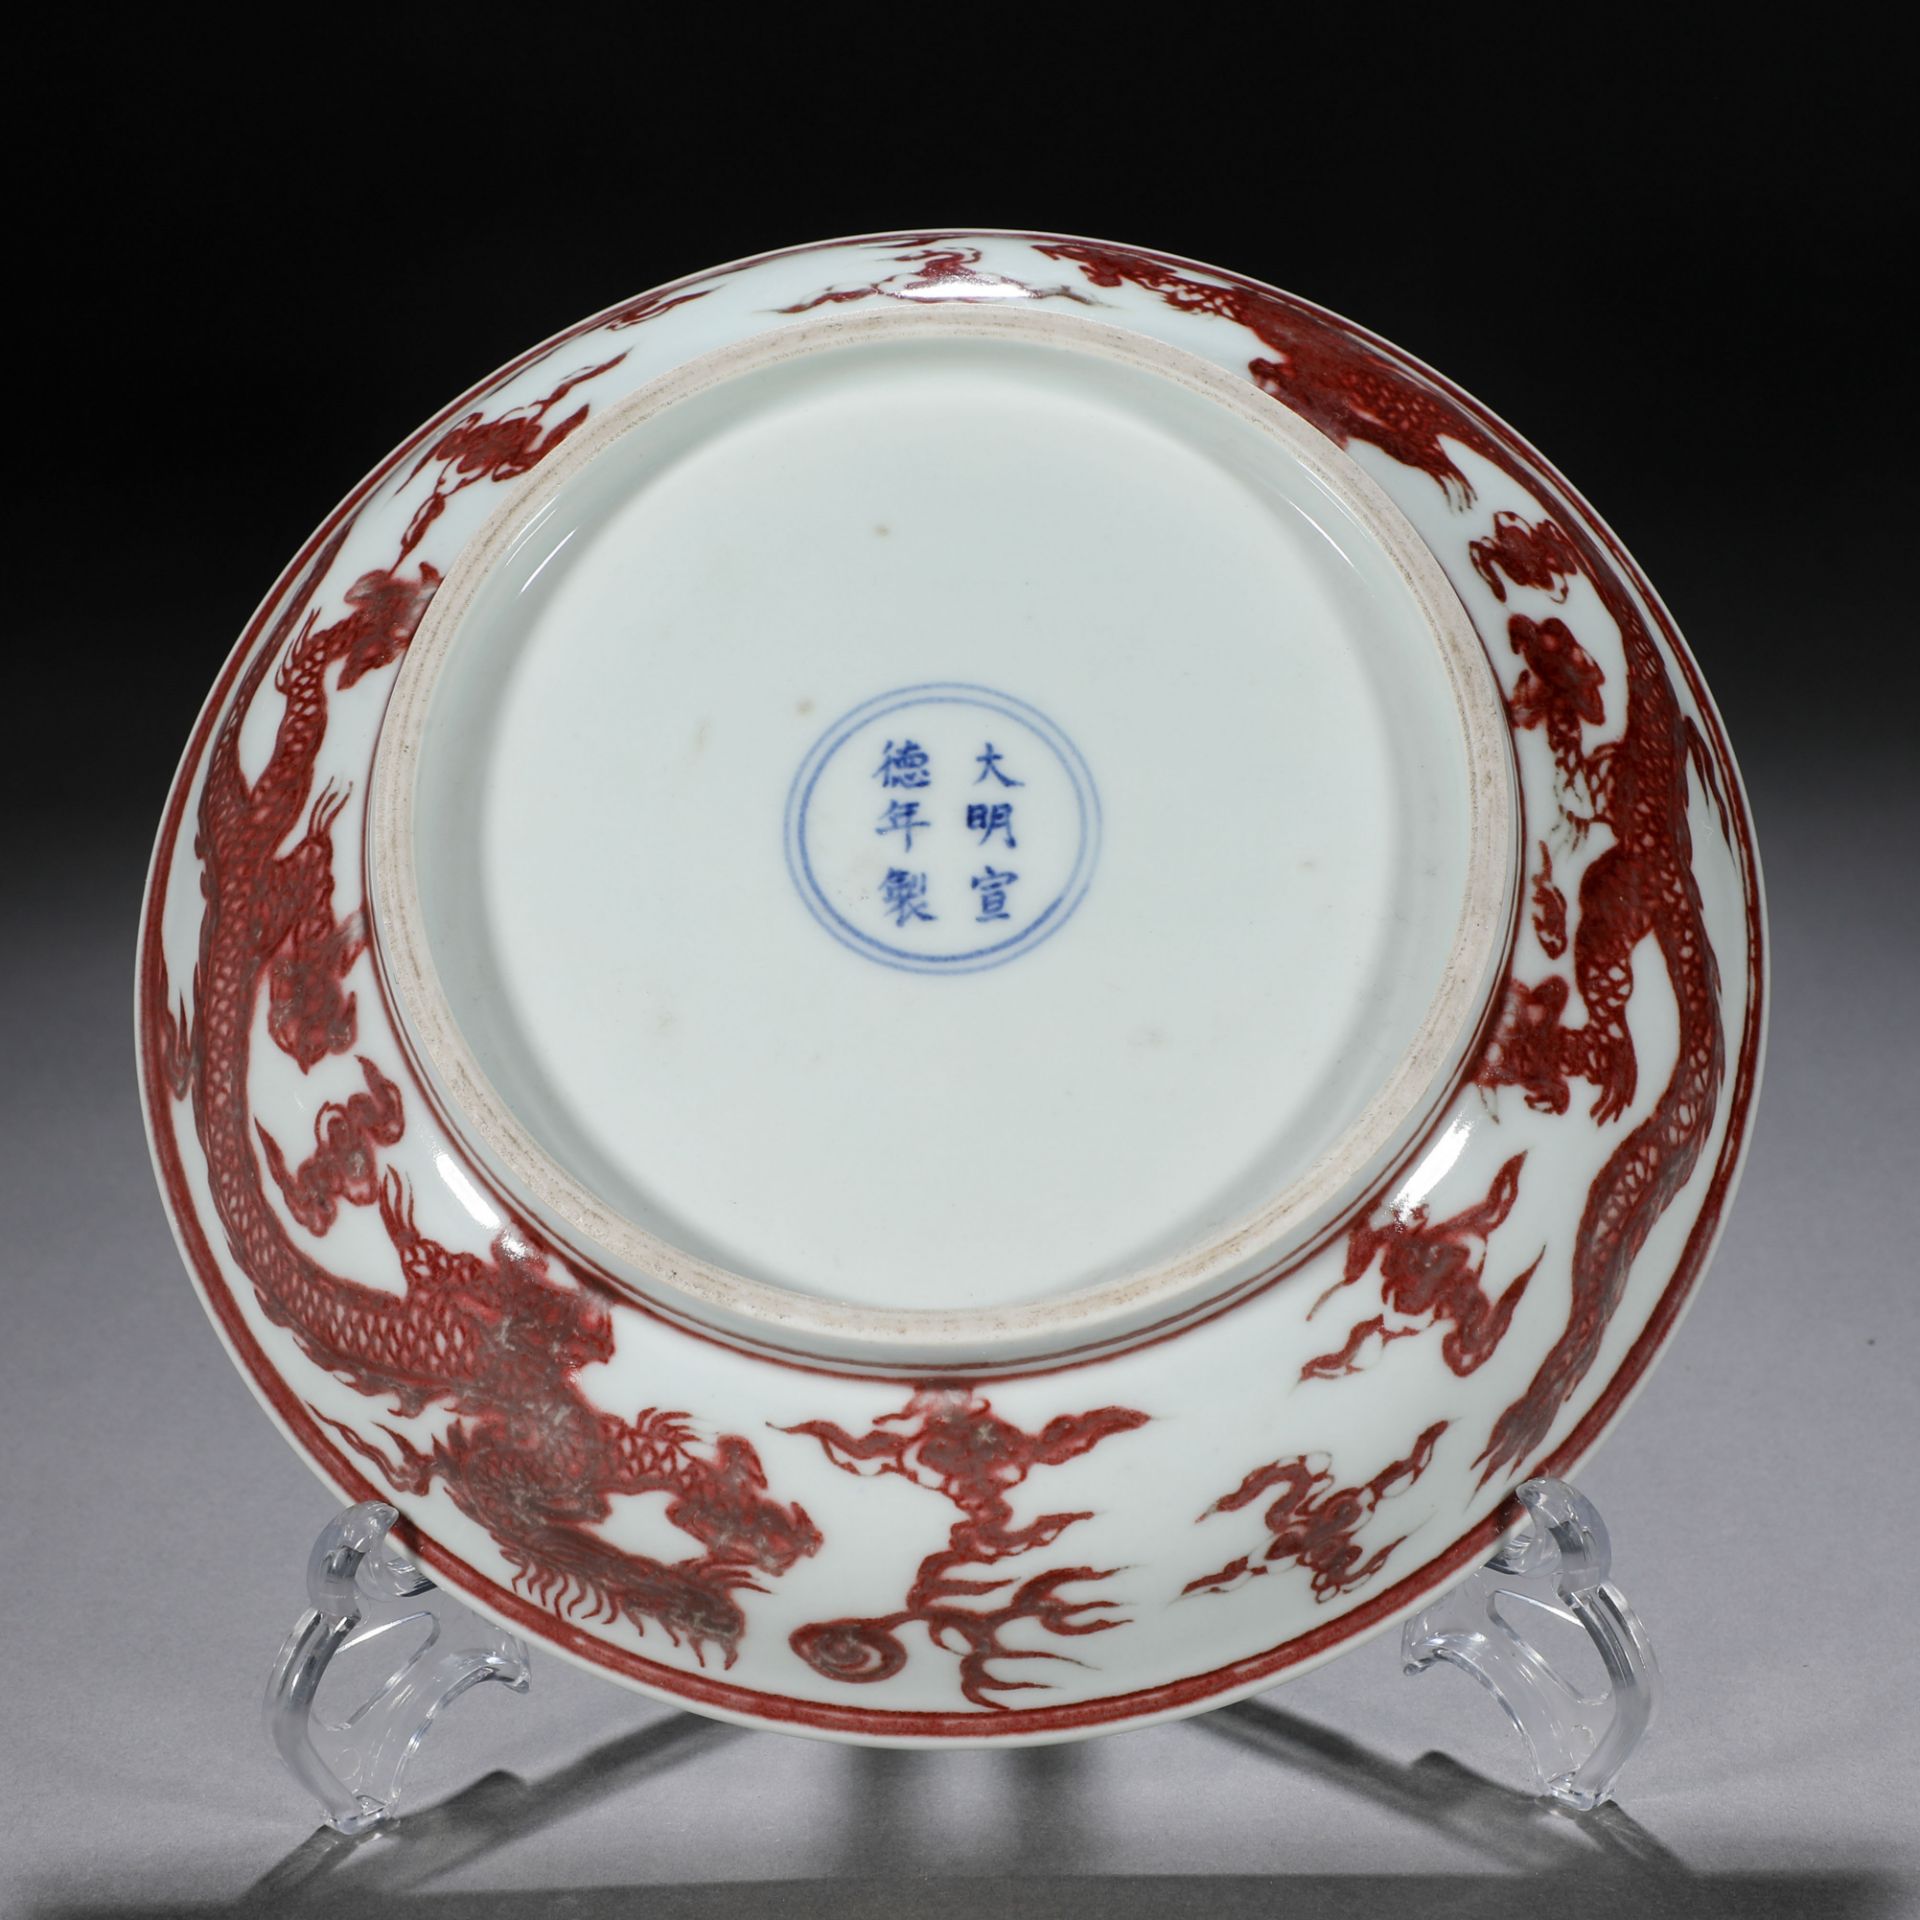 A Chinese Copper Red Dragon Plate - Image 8 of 9